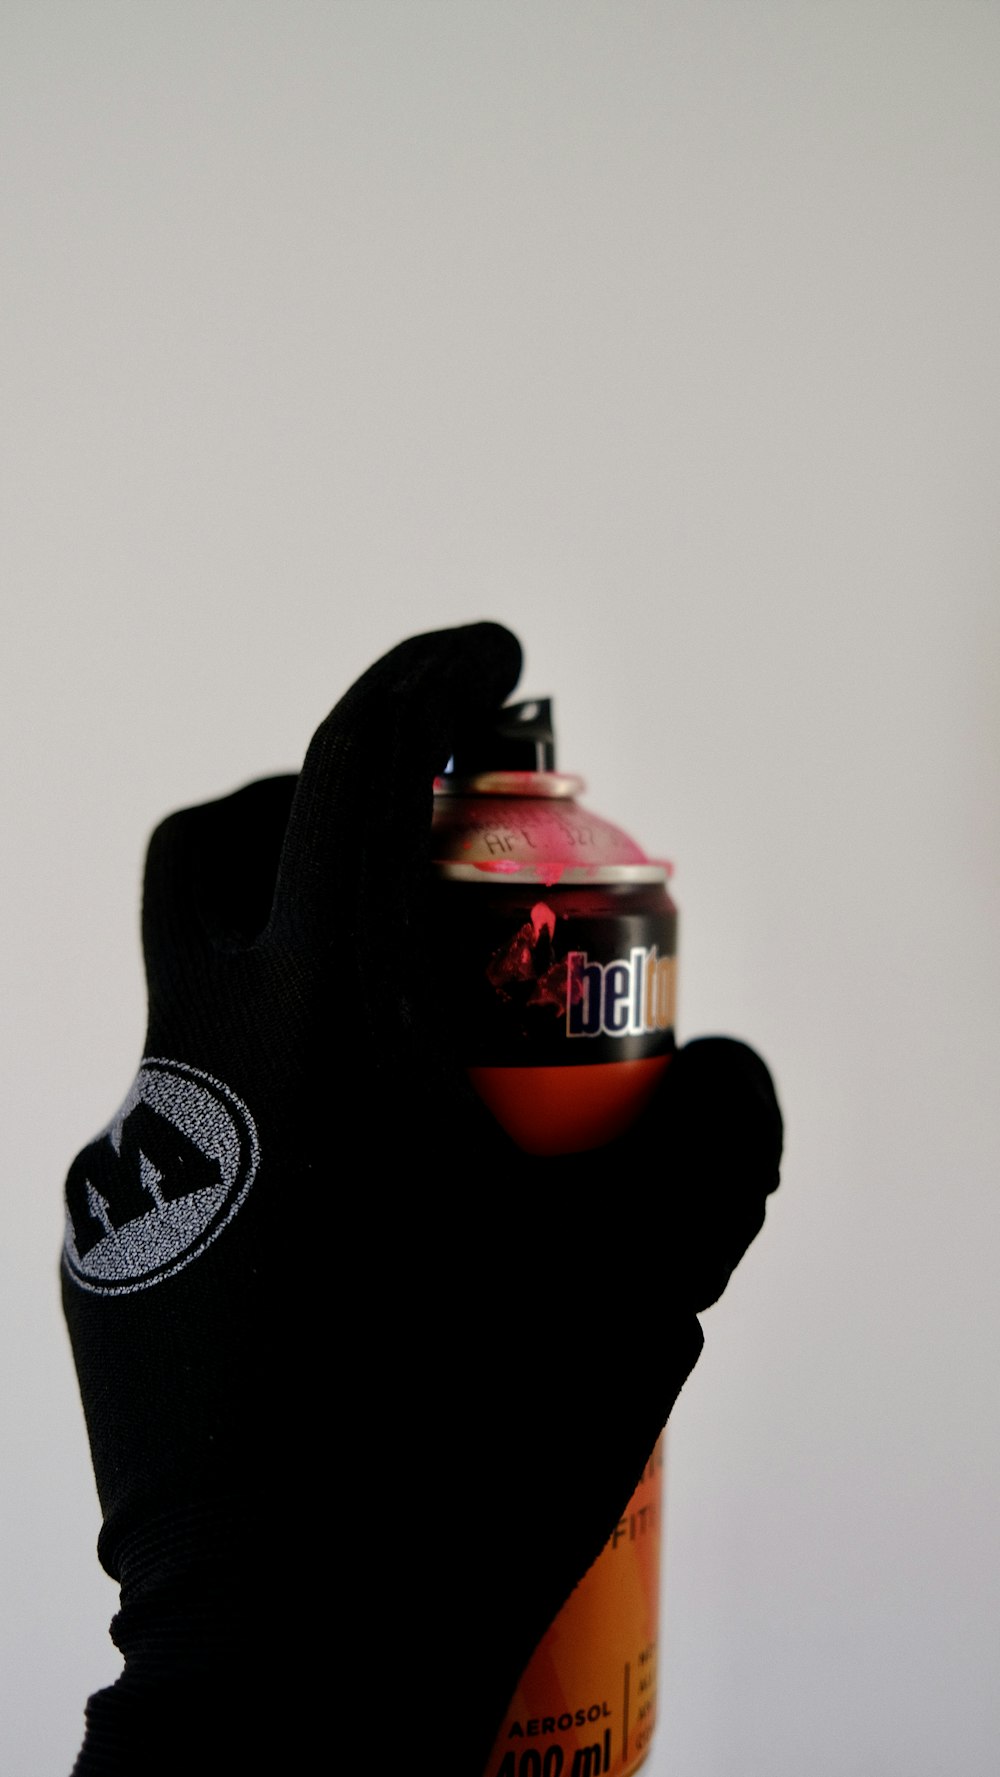 a person wearing a black glove holding a can of beer